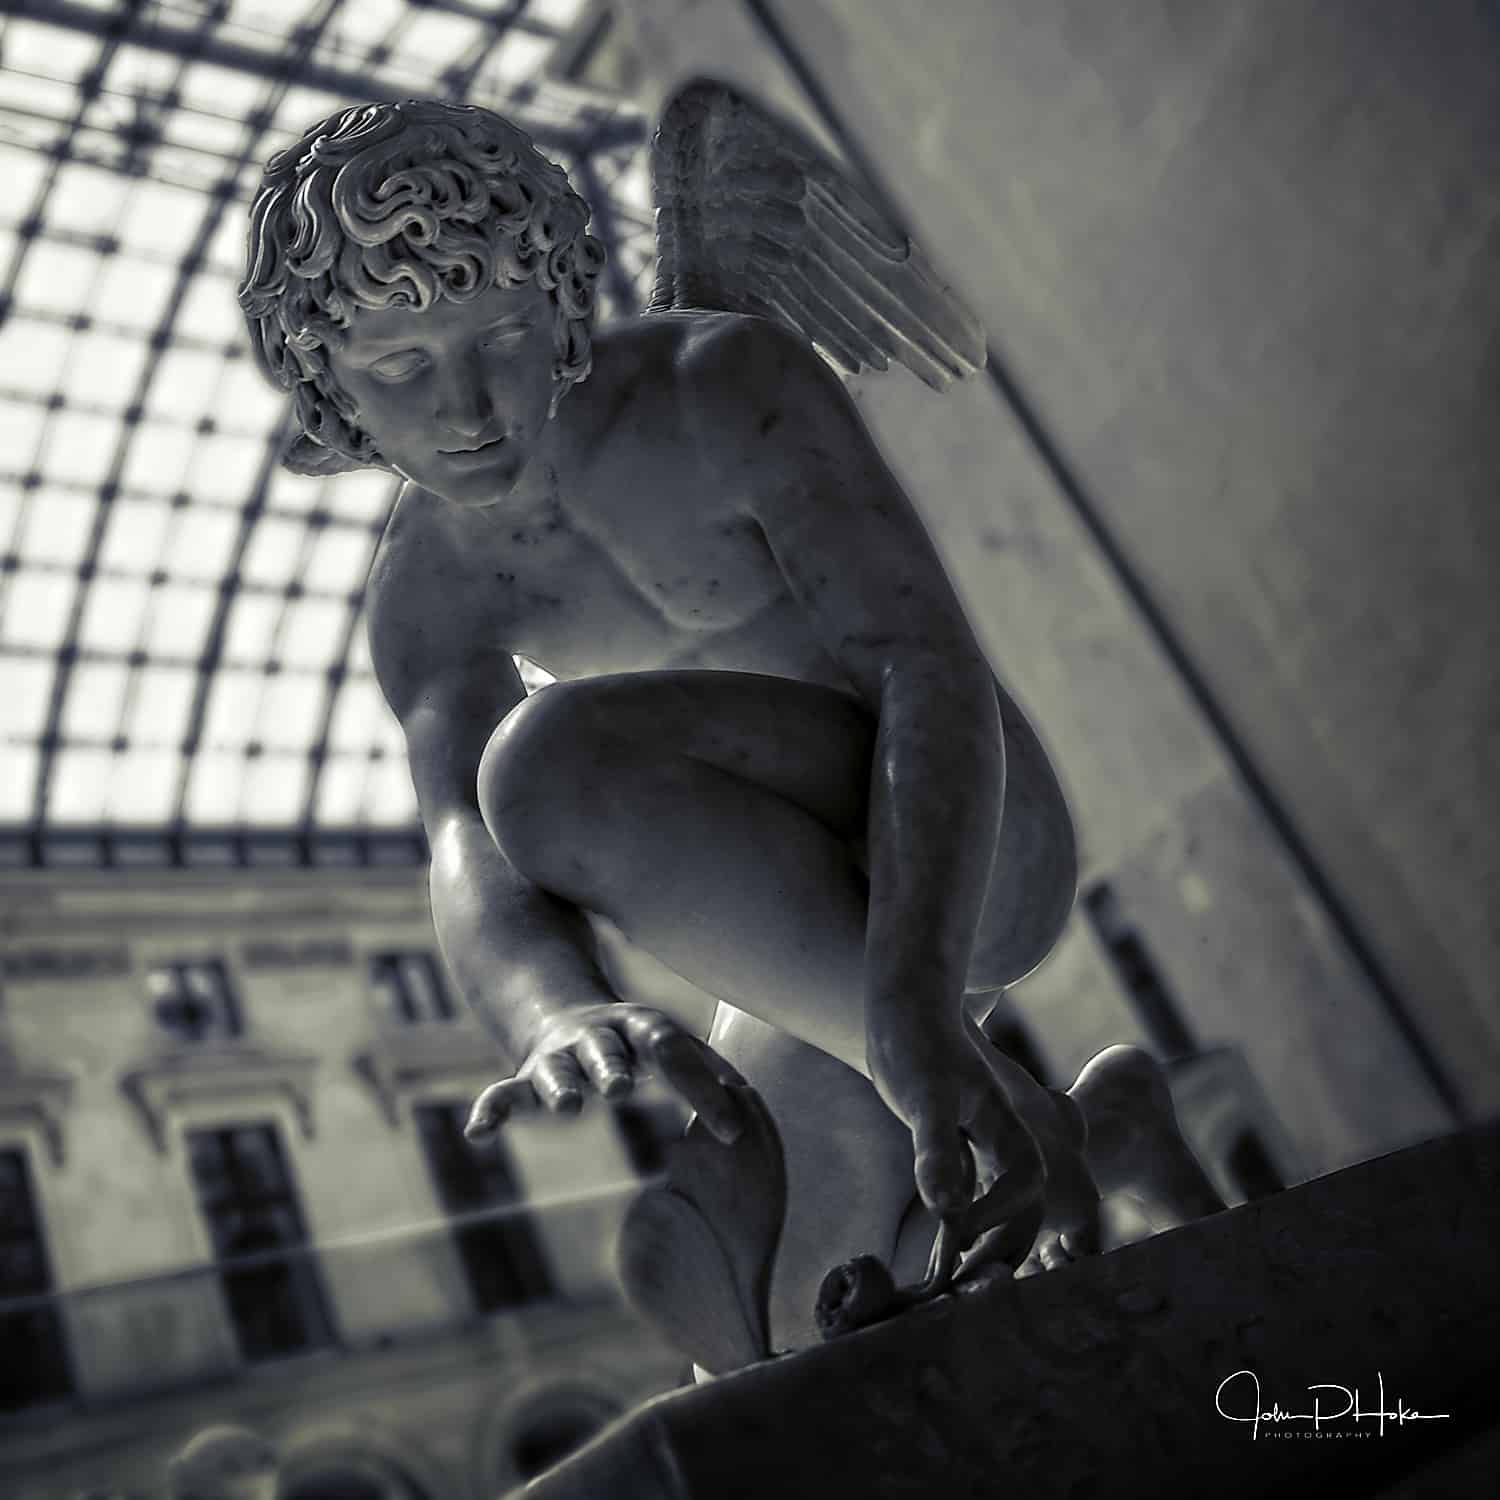 Paris - Louvre - Black and White image of an angel kneeling before a rose